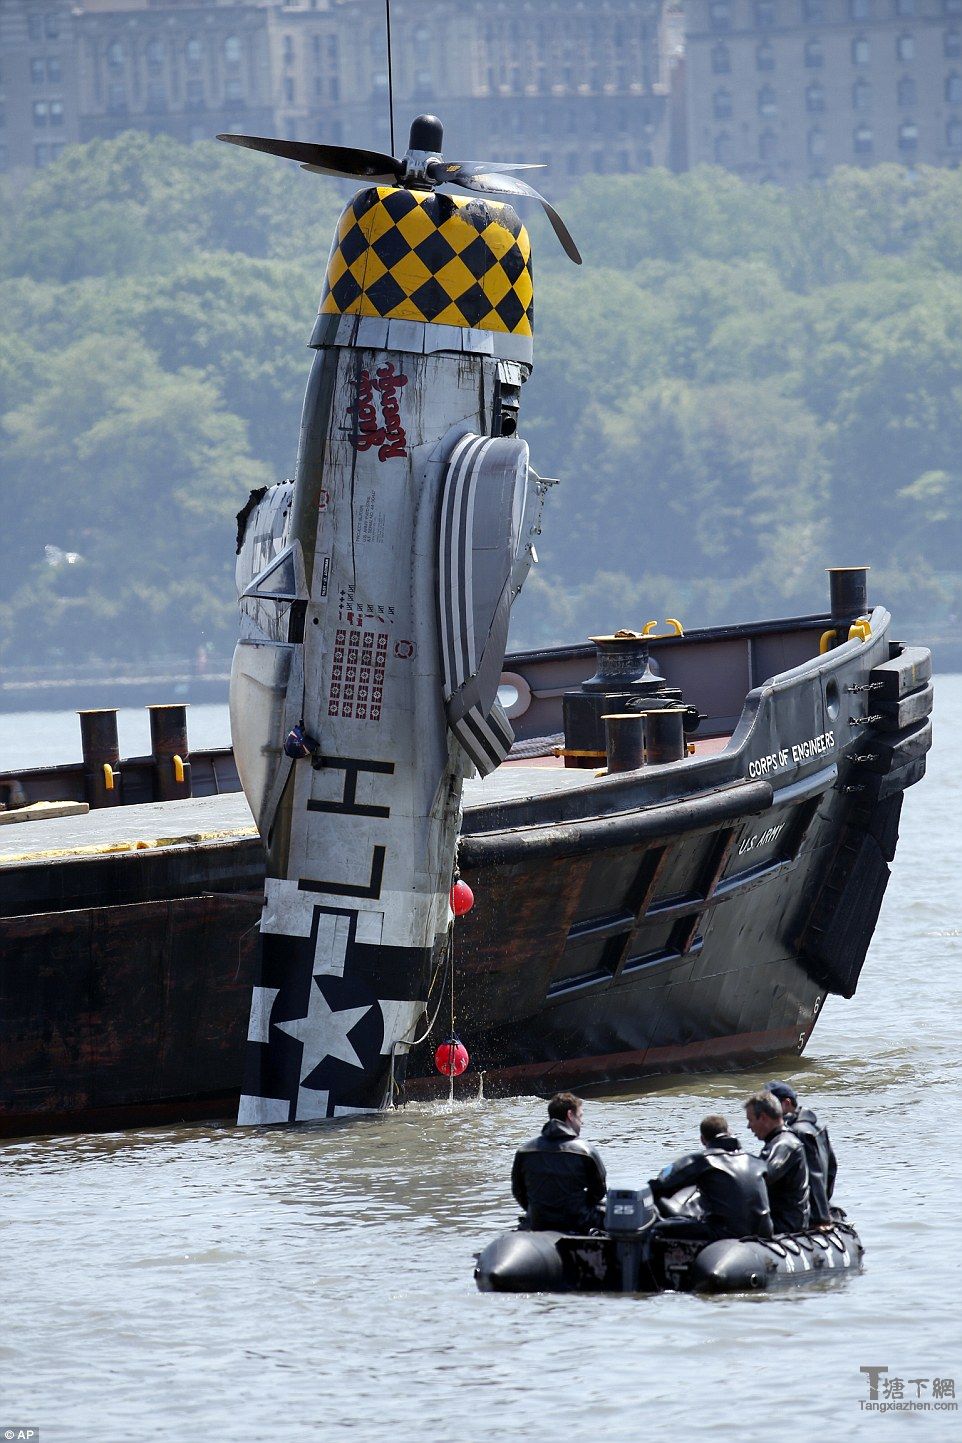 Police divers and Army Corps Of Engineers personnel fished out the P-47 from the Hudson River on Saturday morning (pictured), the day after it crashed into a water, killing its 56-year-old pilot